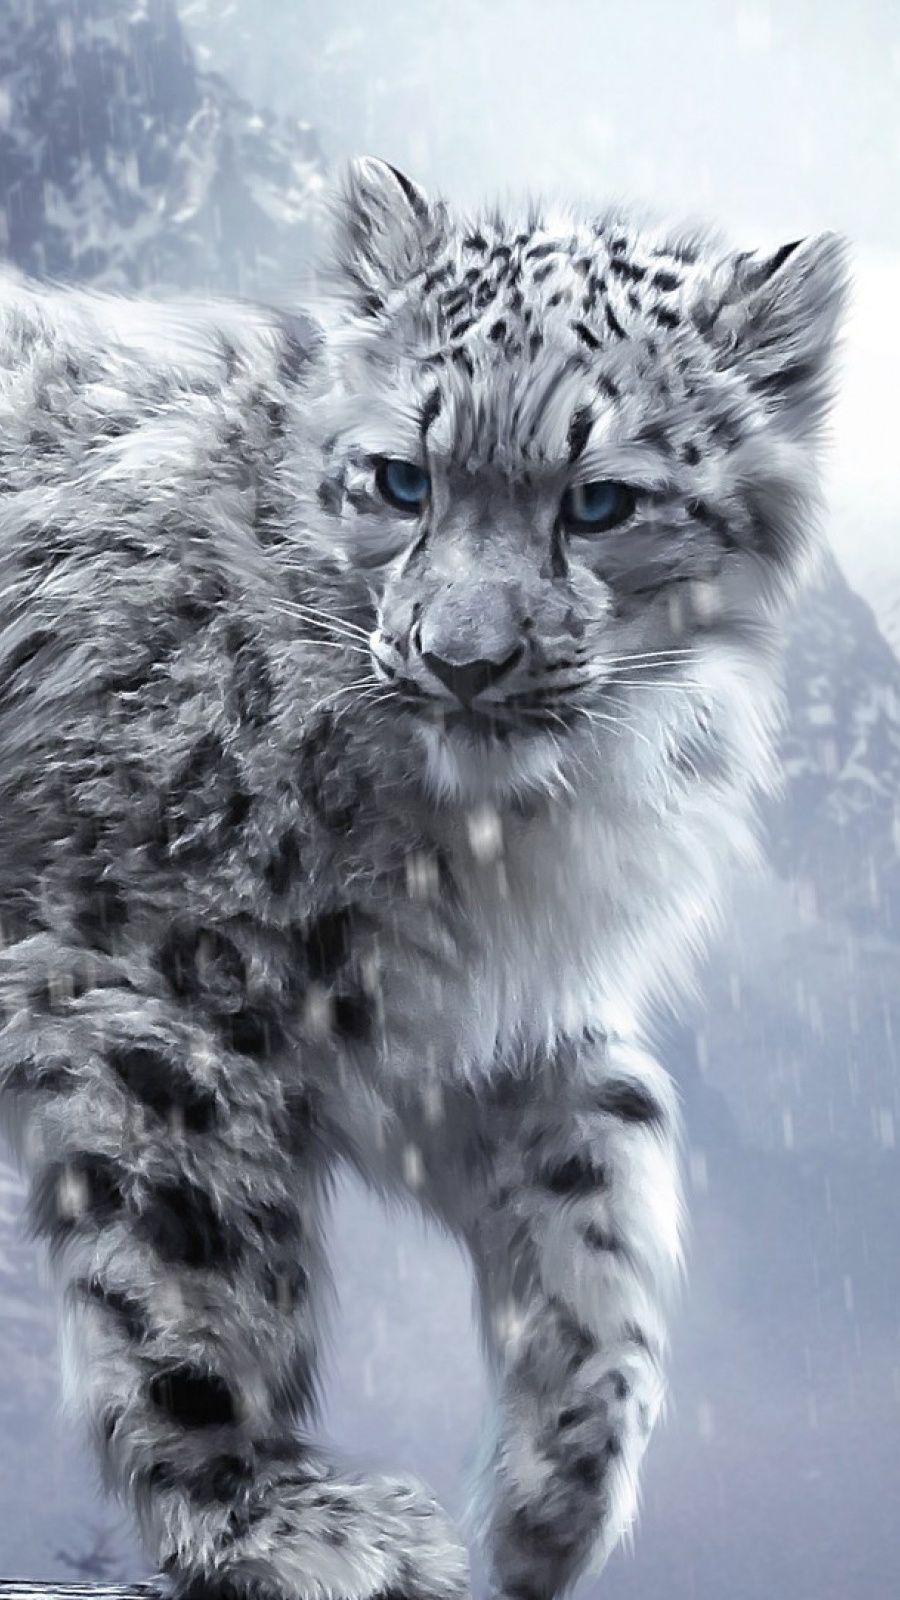 White Snow Leopards Mobile Wallpaper Wall. Animals beautiful, Animals, Cute animals